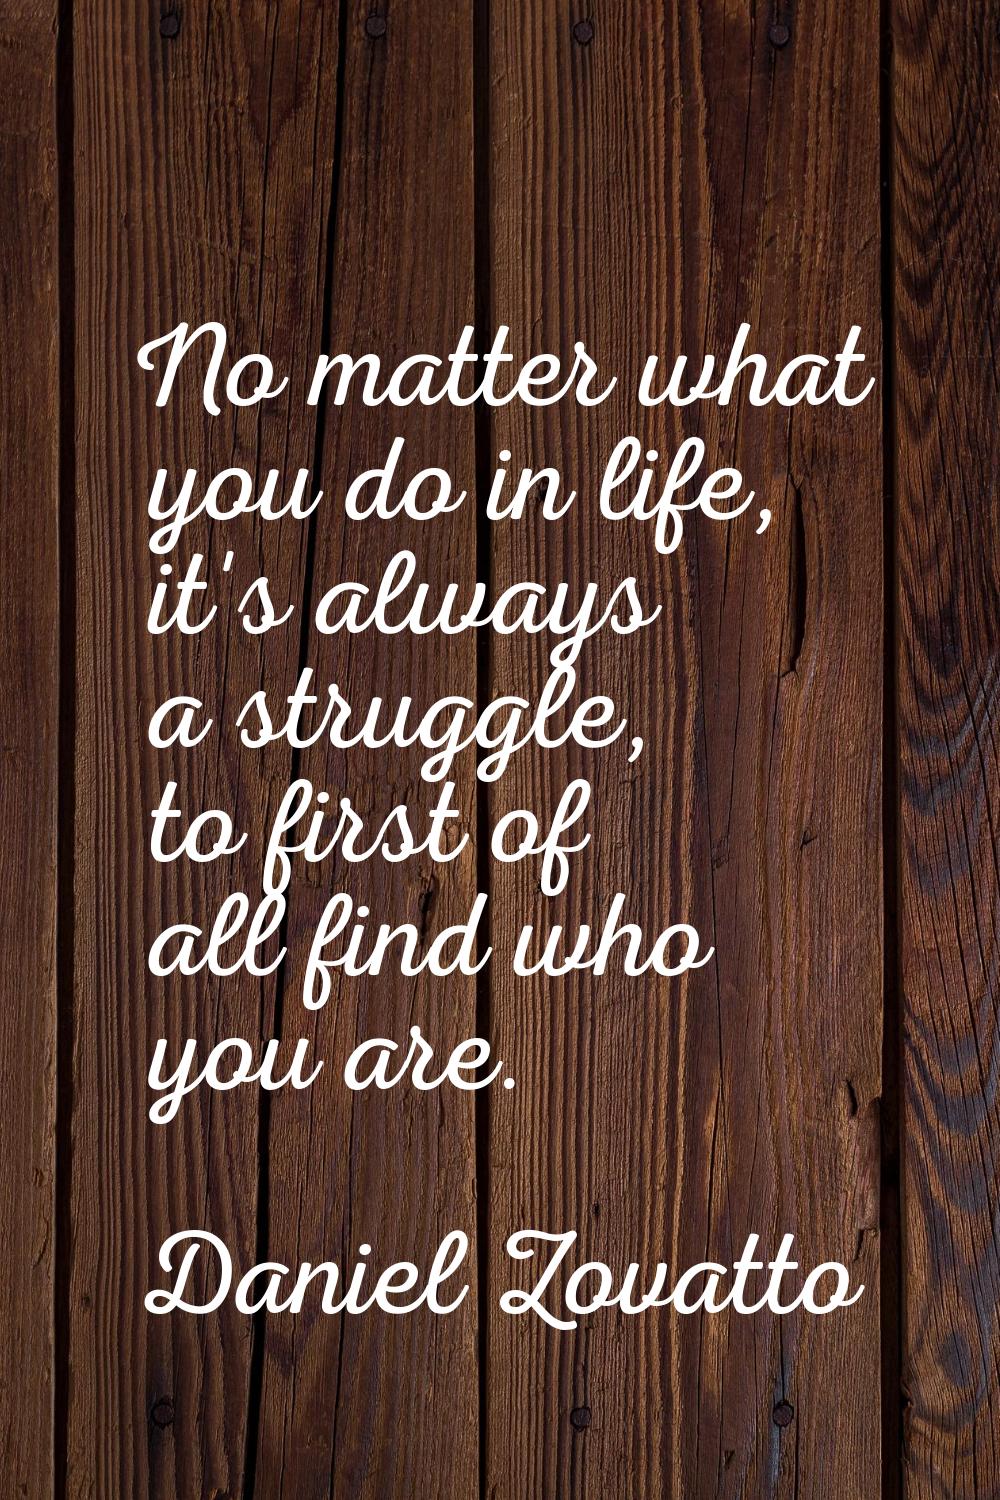 No matter what you do in life, it's always a struggle, to first of all find who you are.